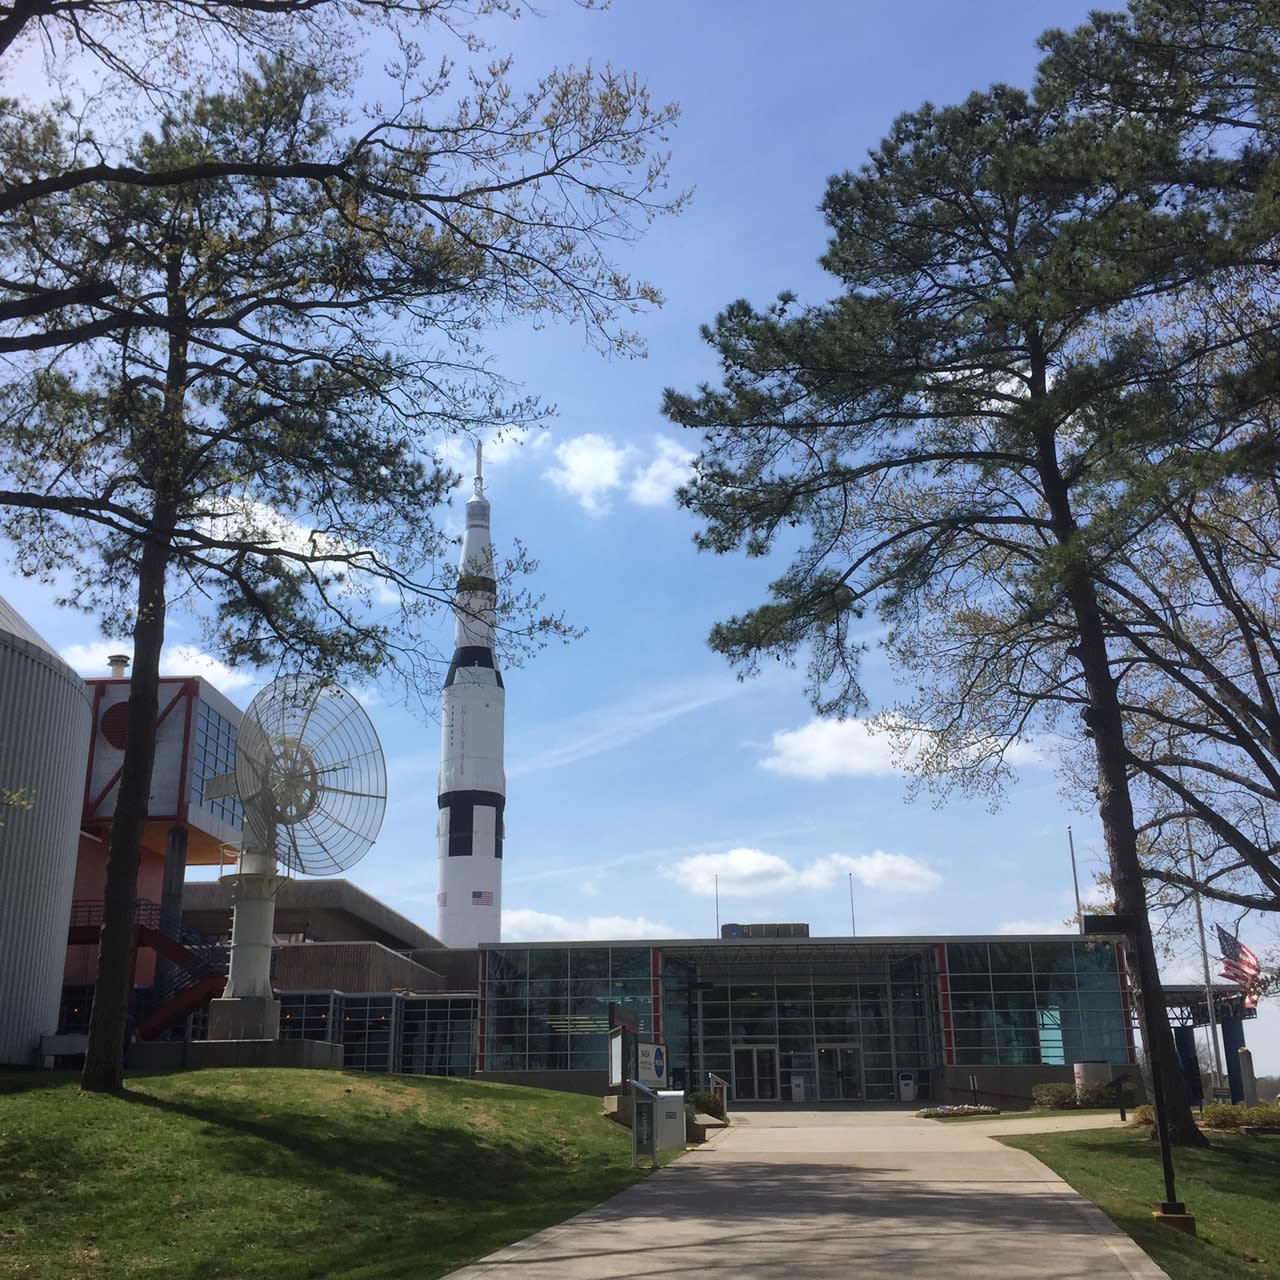 Tips For Huntsville Visitors from SPACE!